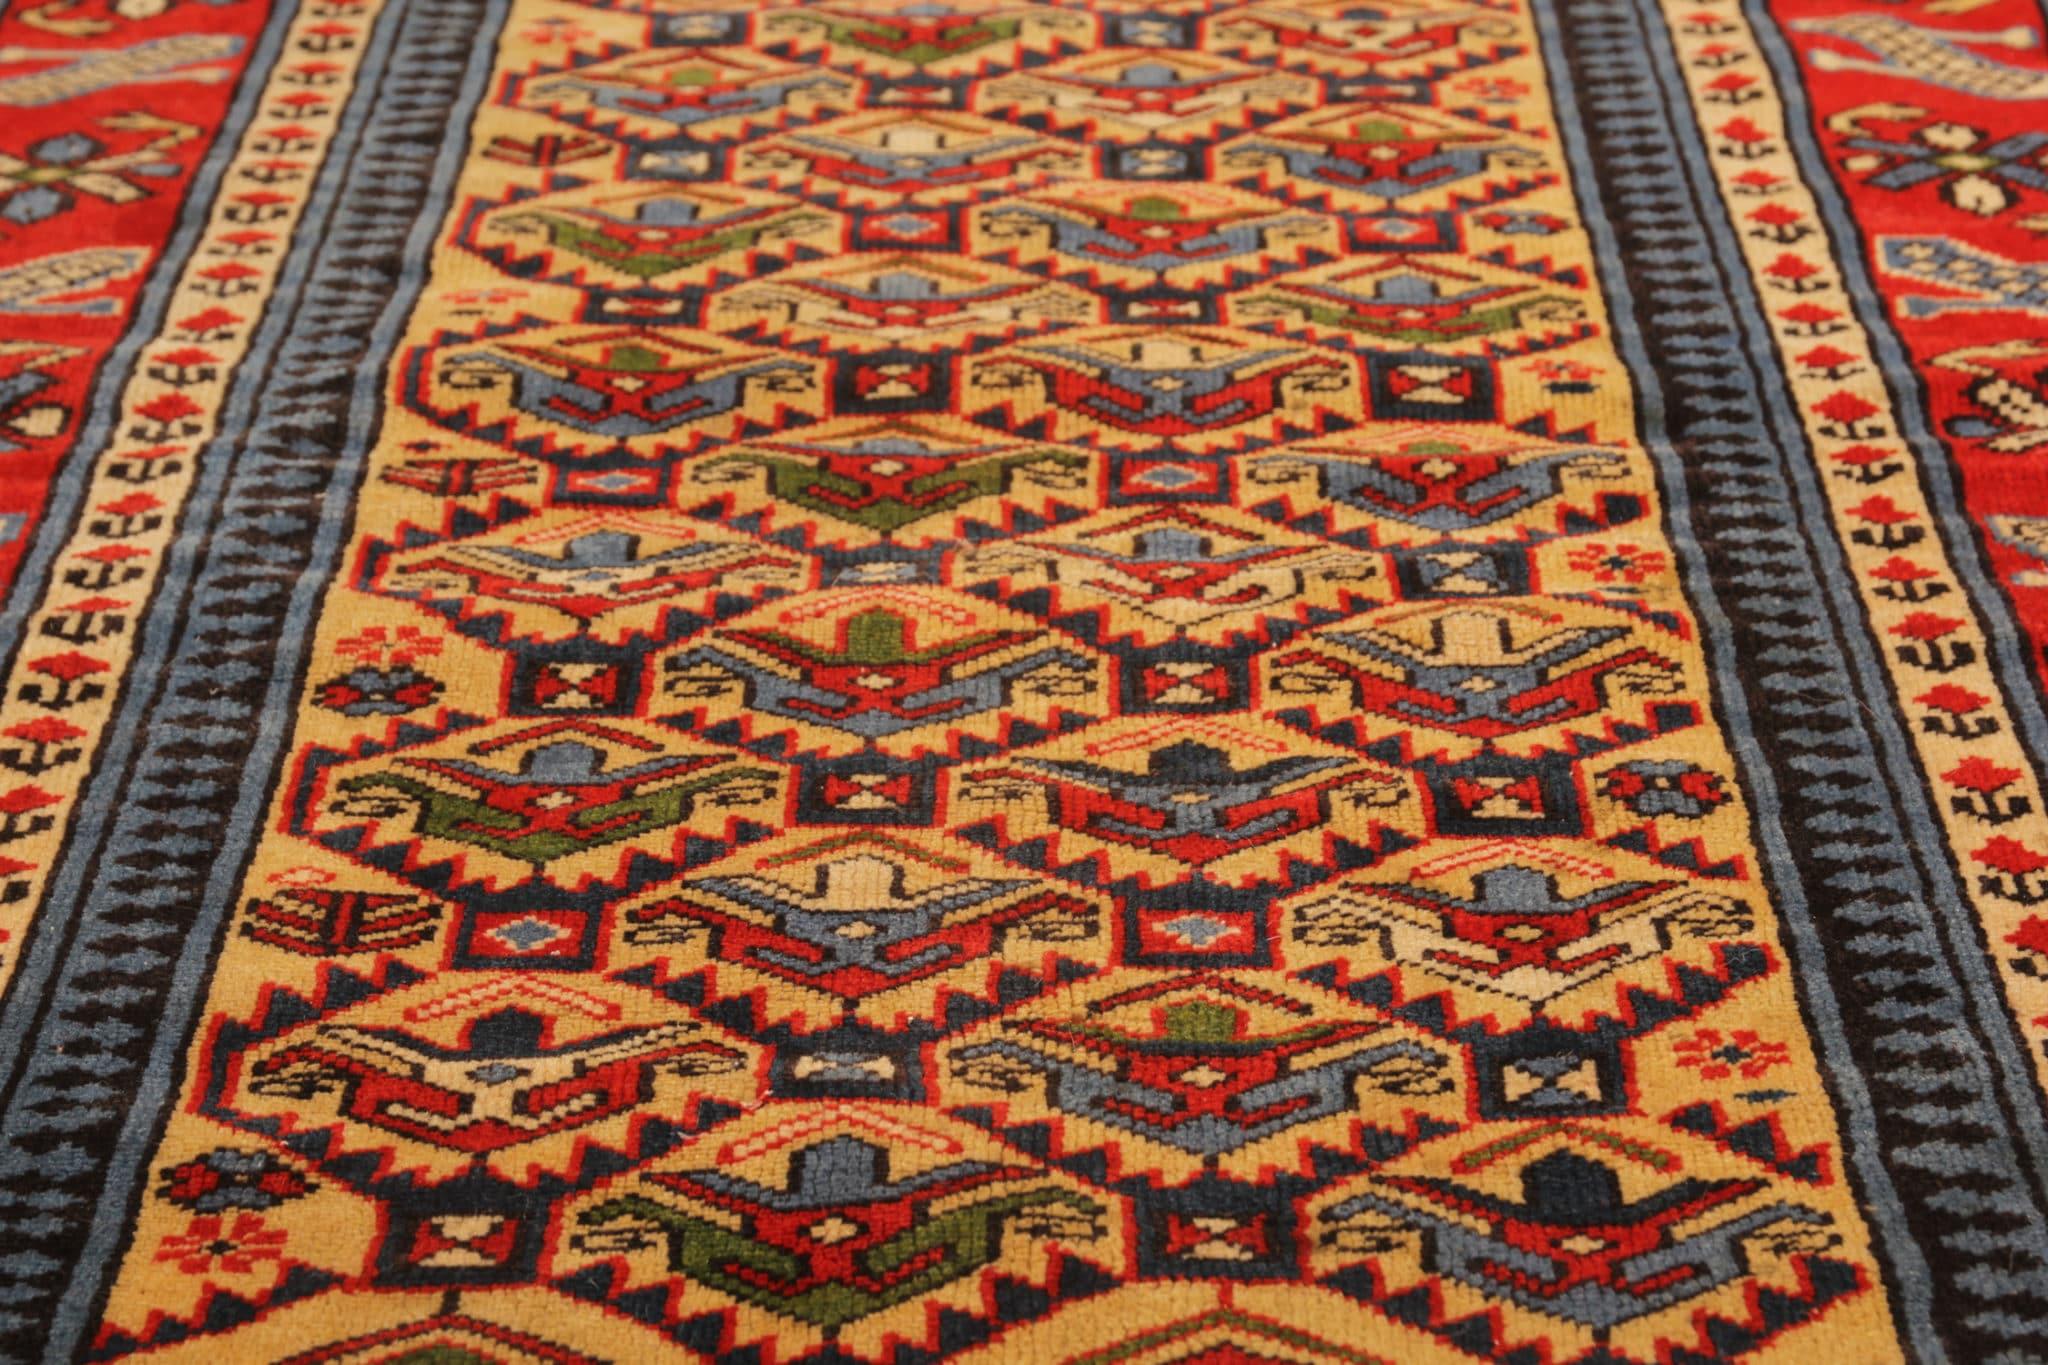 Capture the timeless allure of the caucasus with our vintage Caucasian oriental handmade carpet from Shirvan area. Crafted with meticulous care, this exquisite piece showcases the artistry of hand knotting, ensuring enduring quality that lasts for